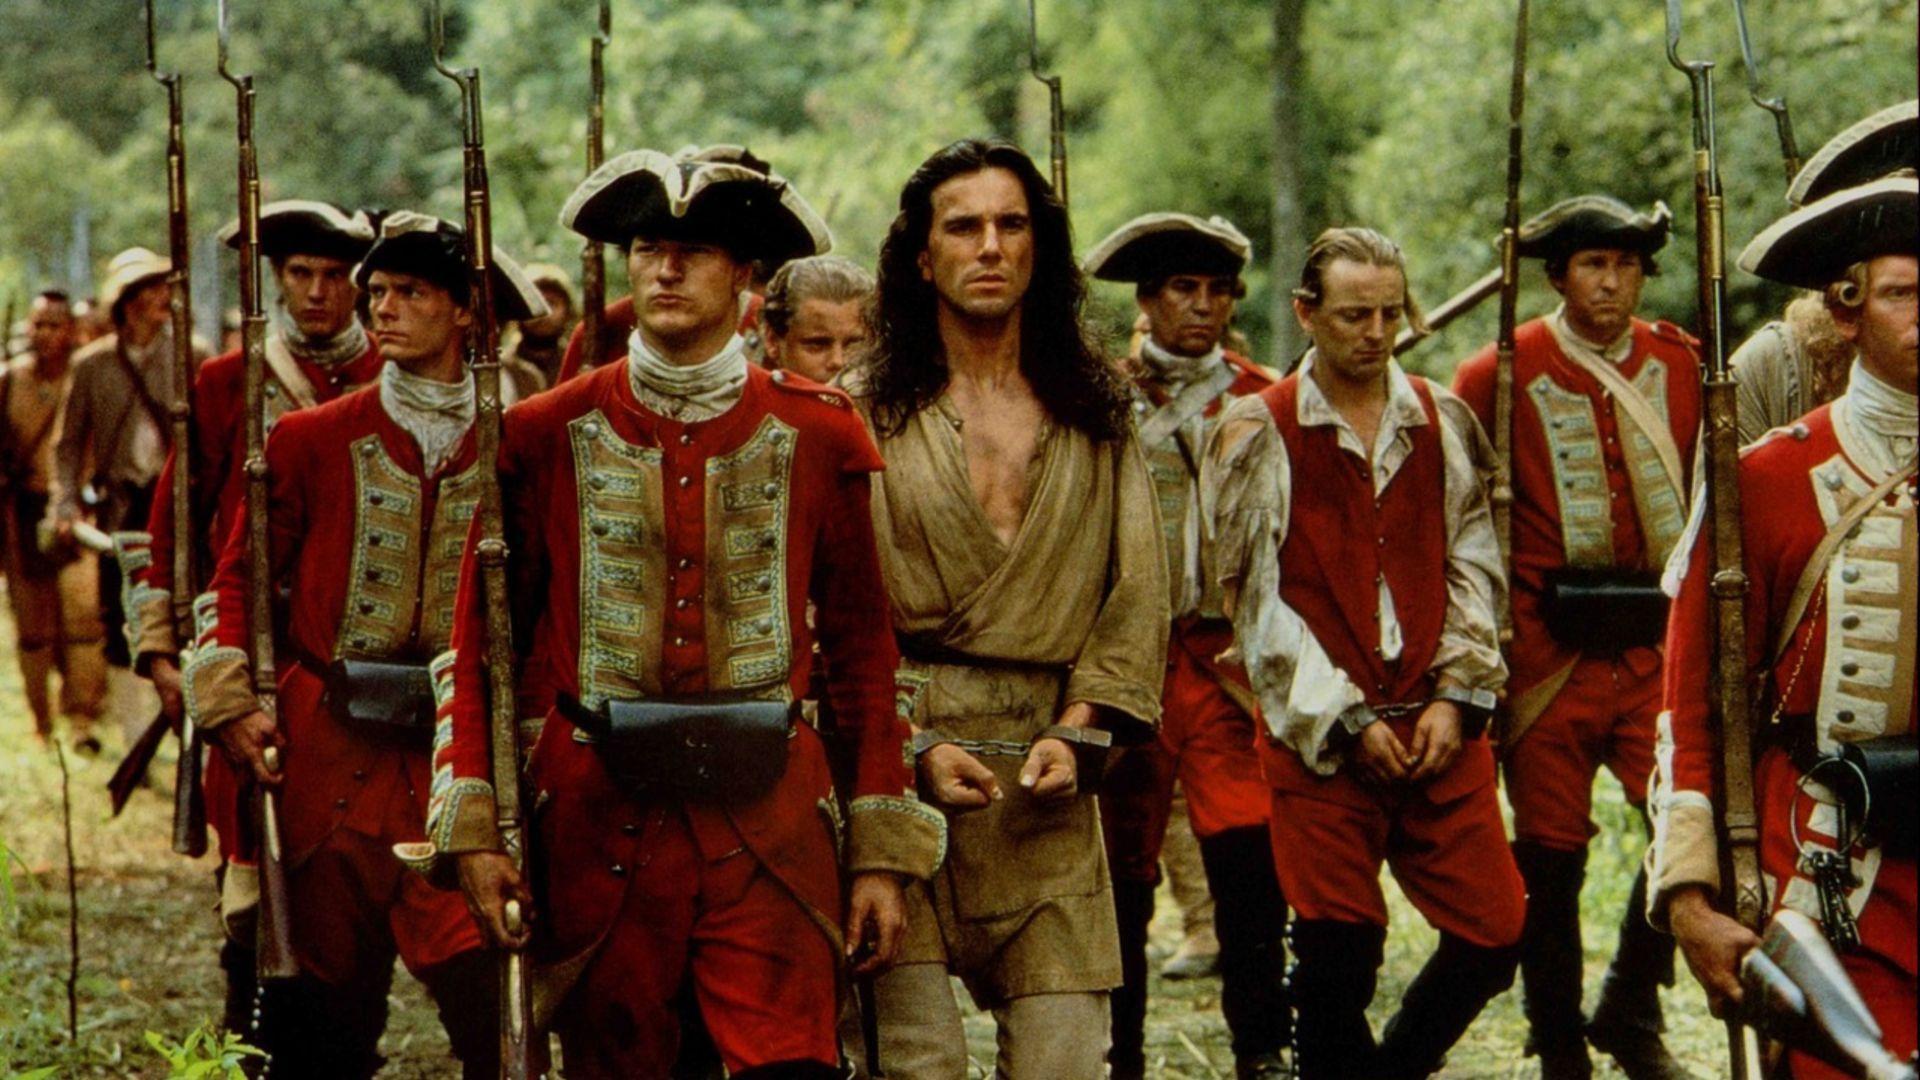 Image gallery for The Last of the Mohicans